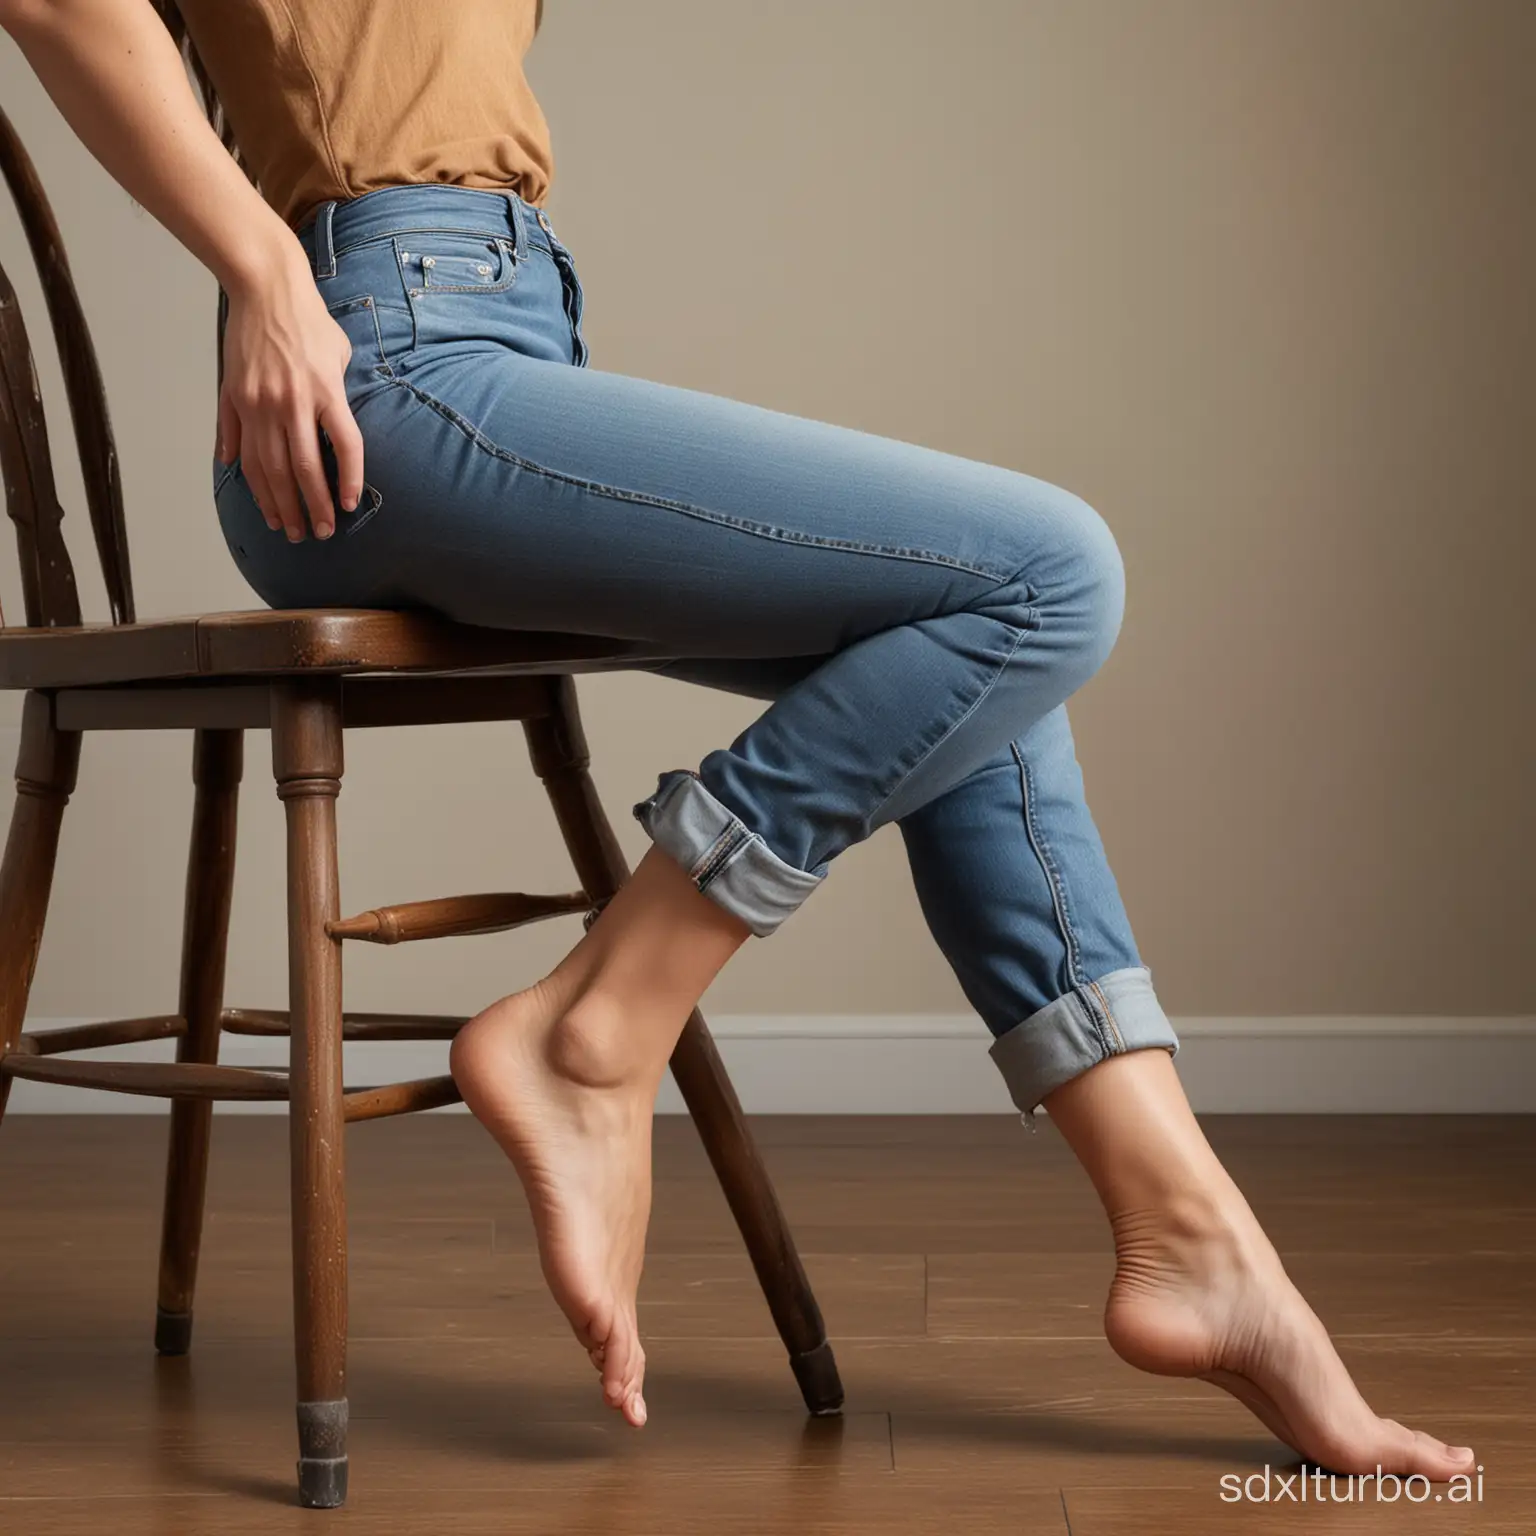 Realistic-Portrait-of-a-Woman-in-Cowboy-Pants-with-Stretched-Leg